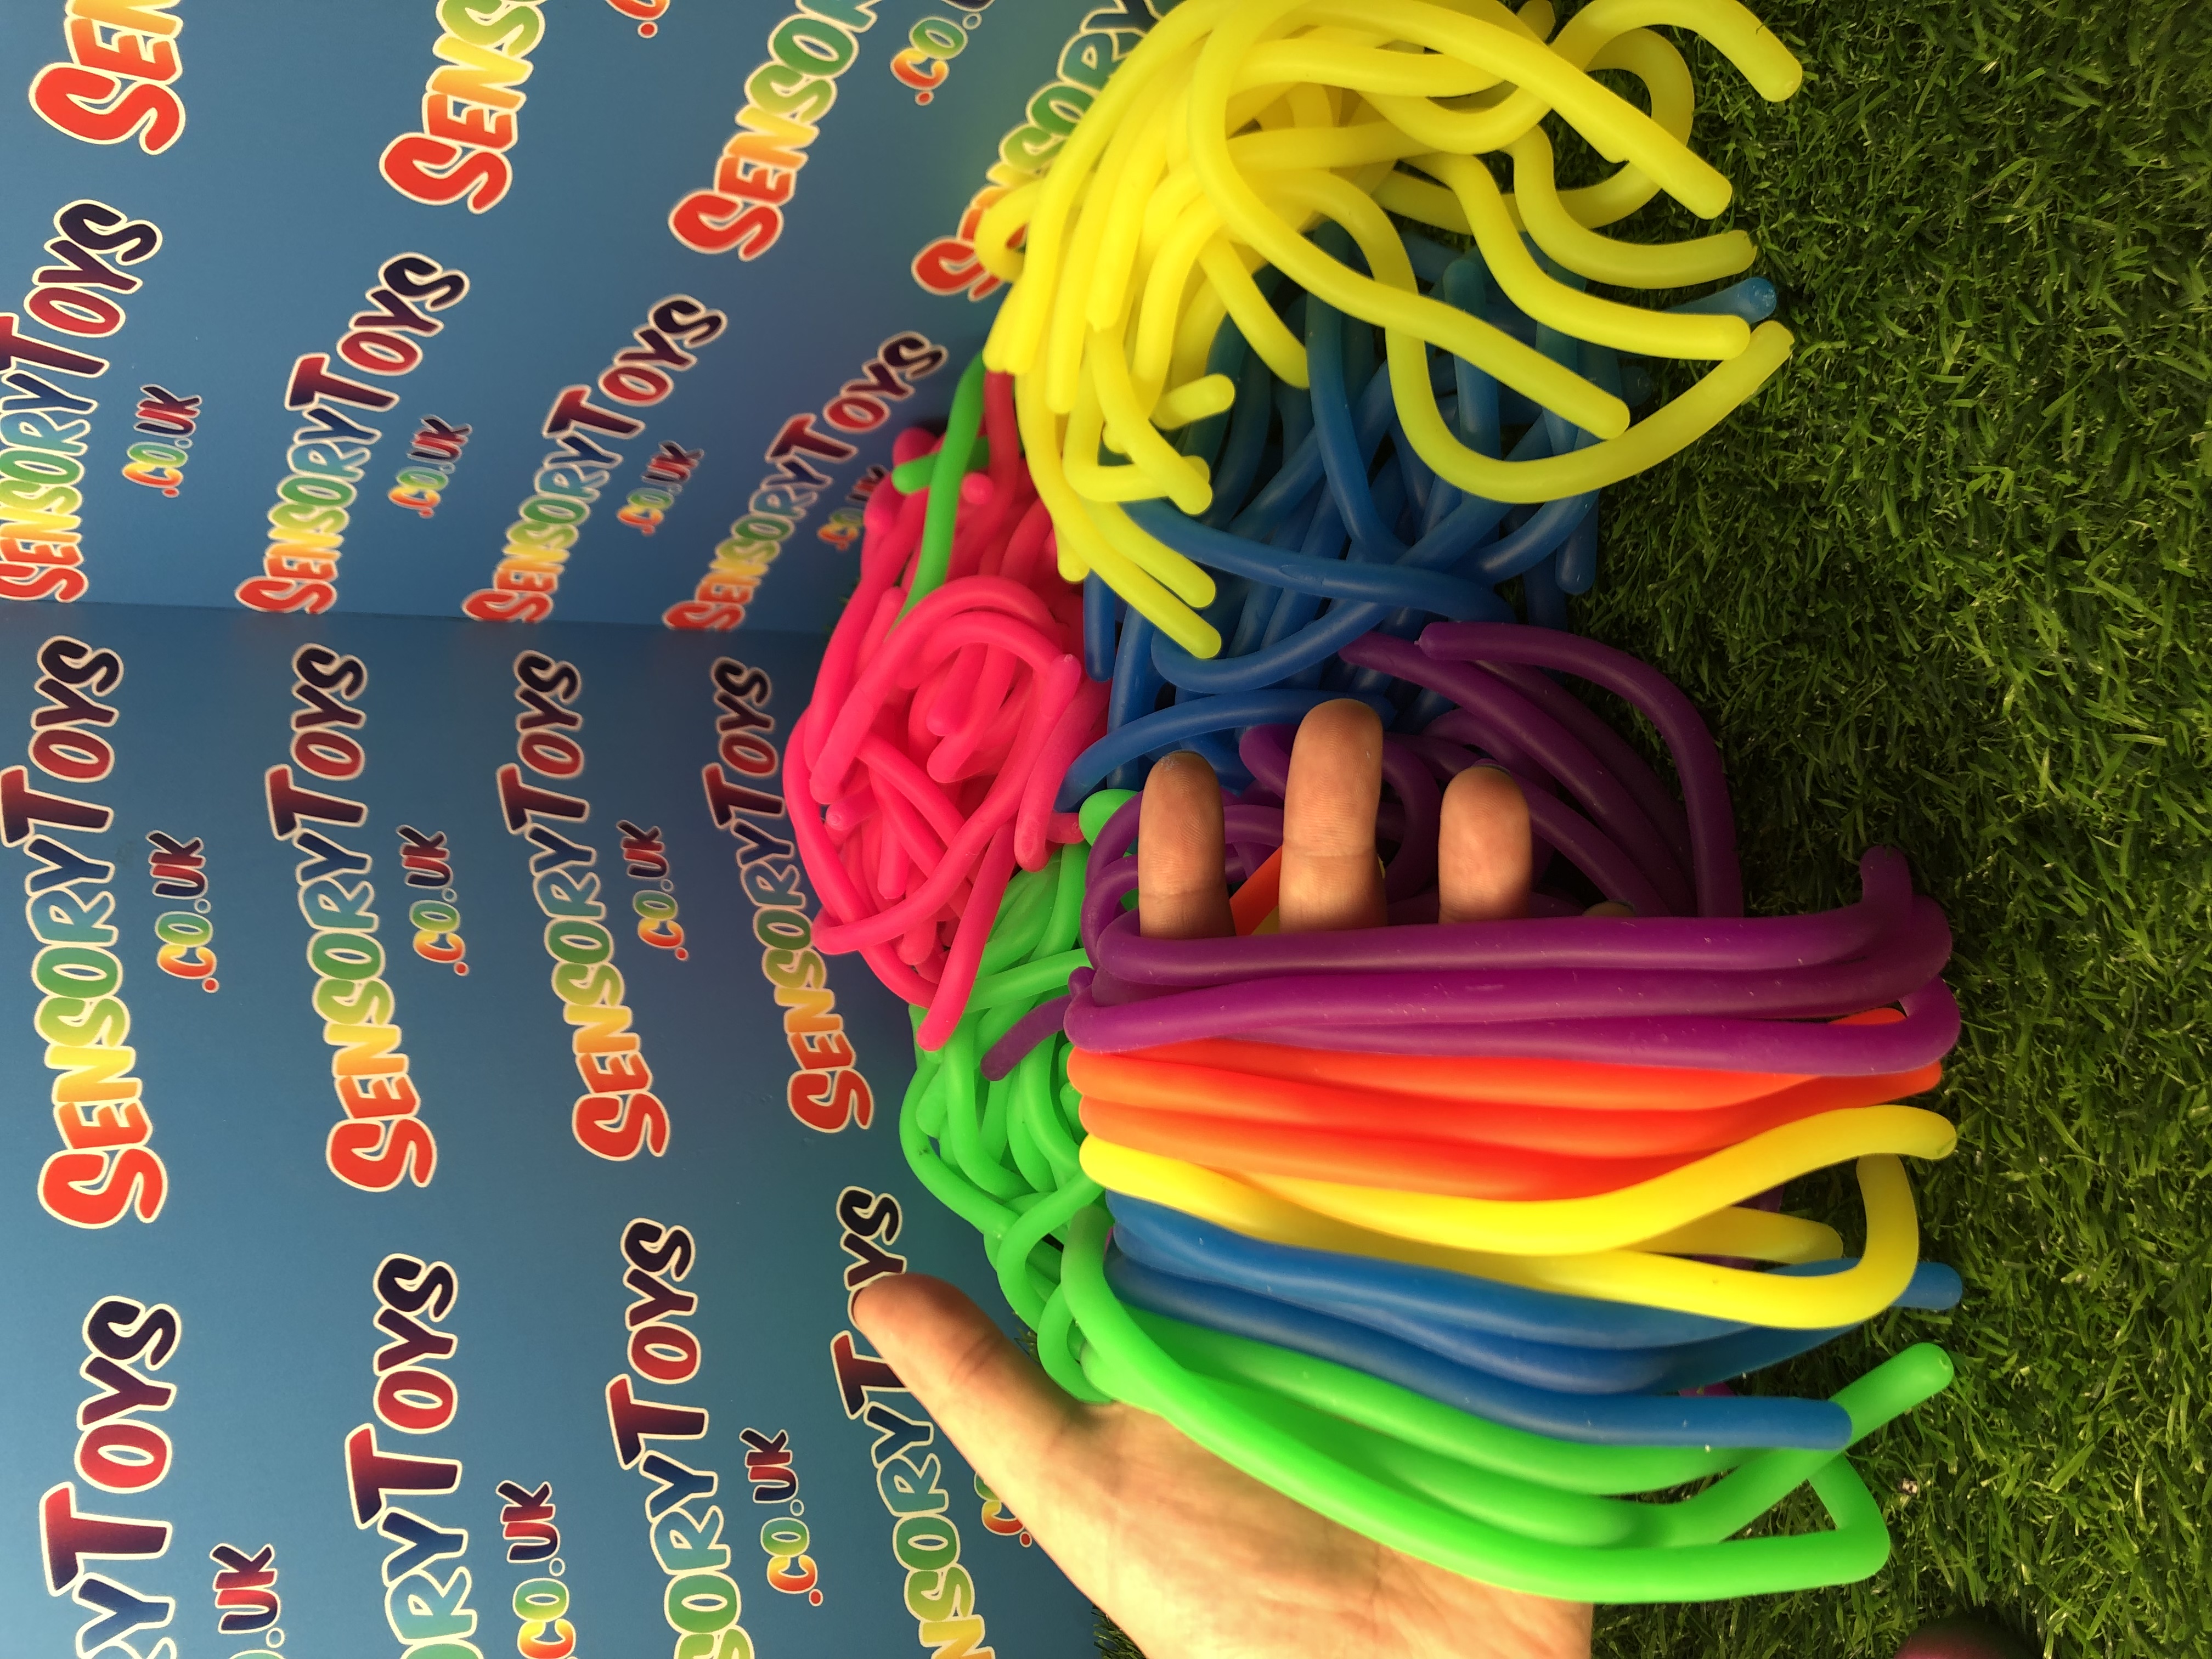 Monkey Noodles - Free Sensory | Online Toy Shop | Popular Sensory in Covering Hampshire, Wiltshire, Berkshire and throughout the United Kingdom